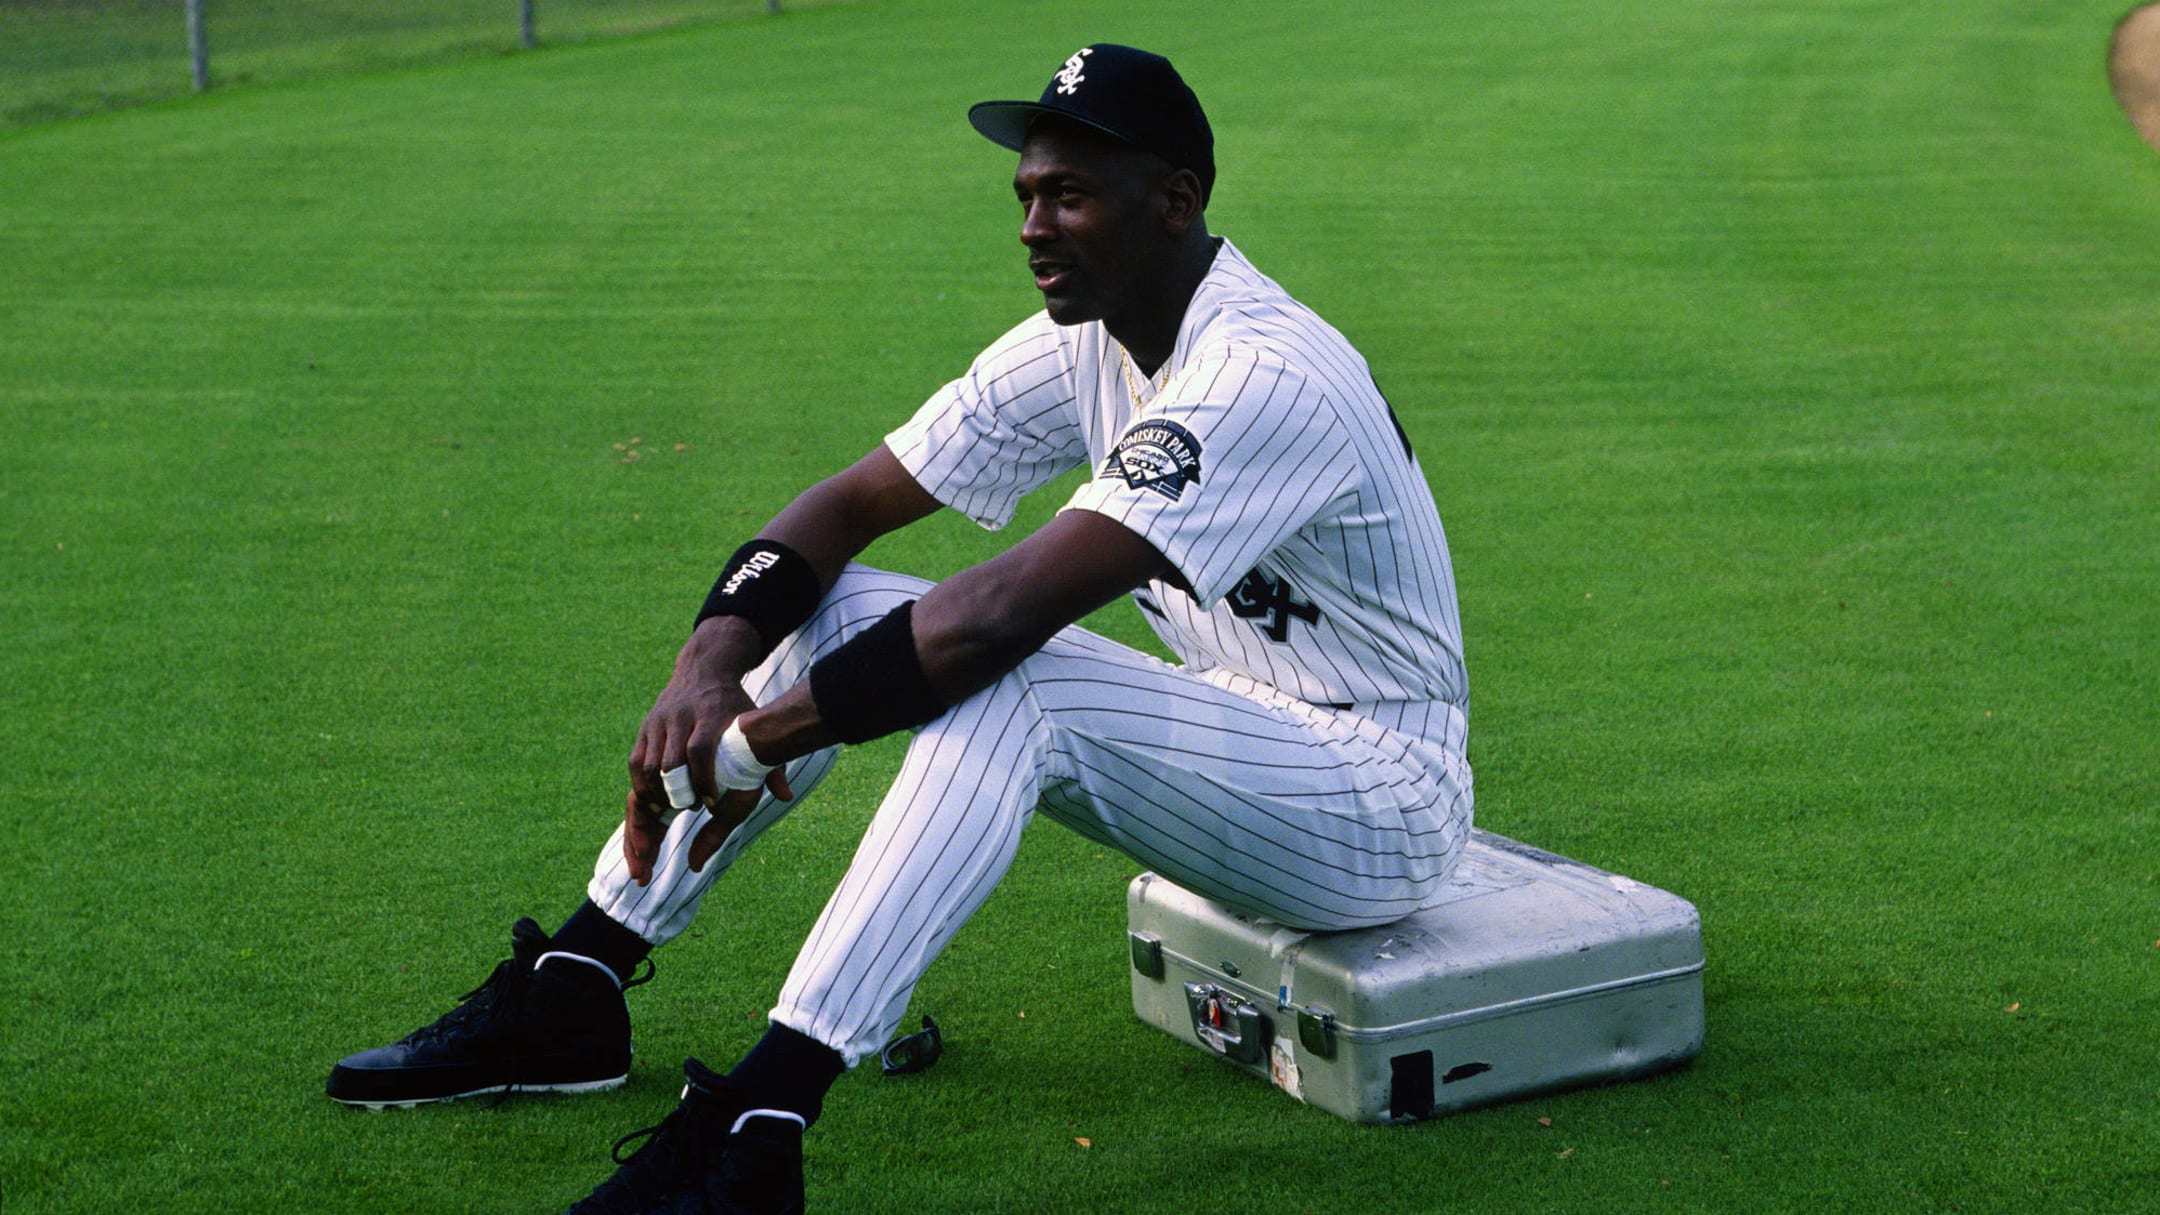 20 years ago today, Michael Jordan signed with White Sox to produce our  Summer of Jordan (photos) 